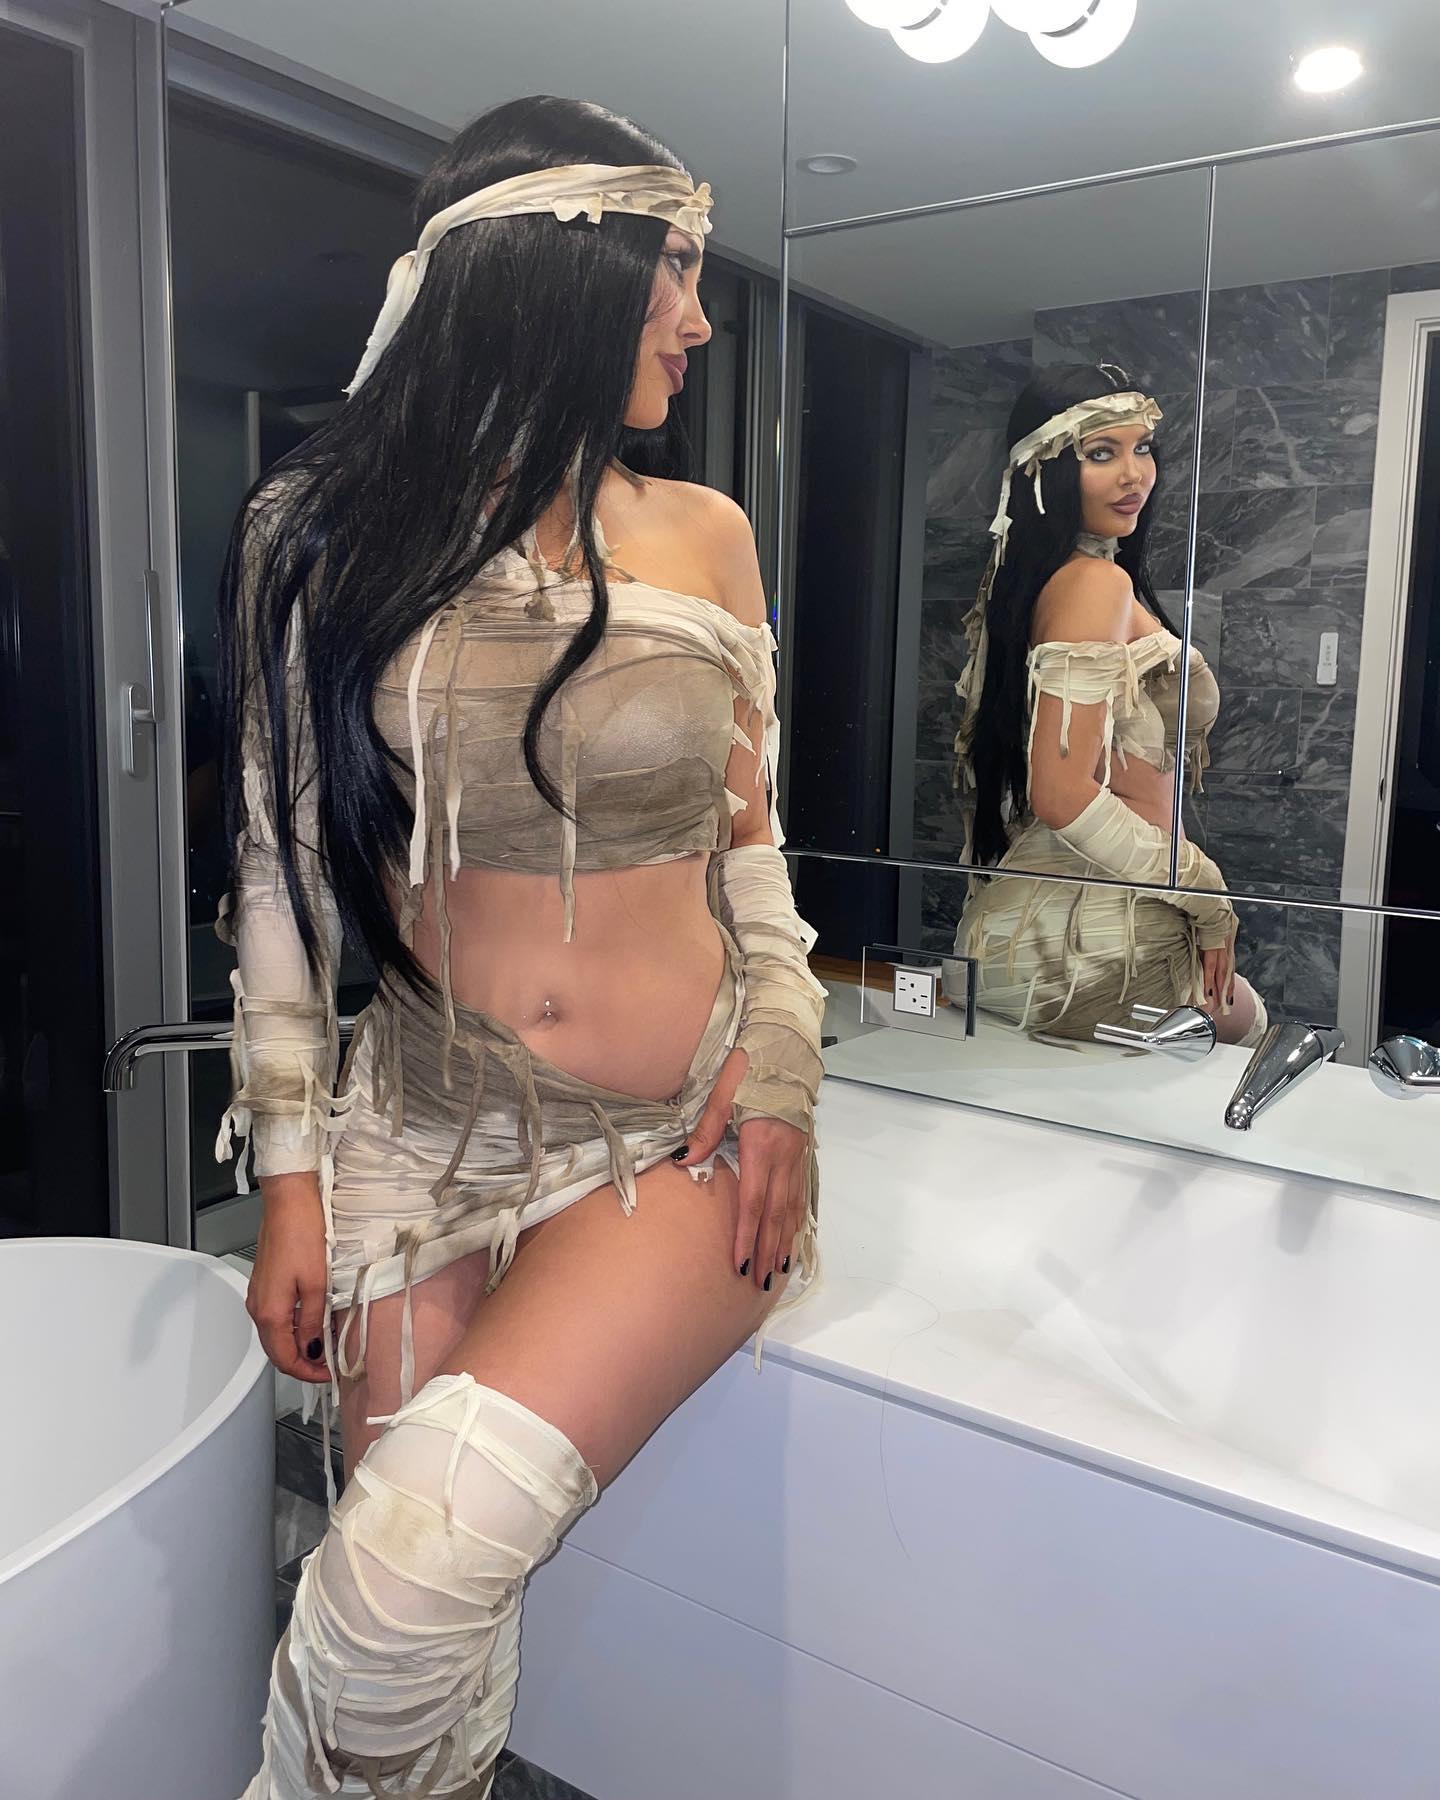 Sophia Pierson went as a mummy for Halloween